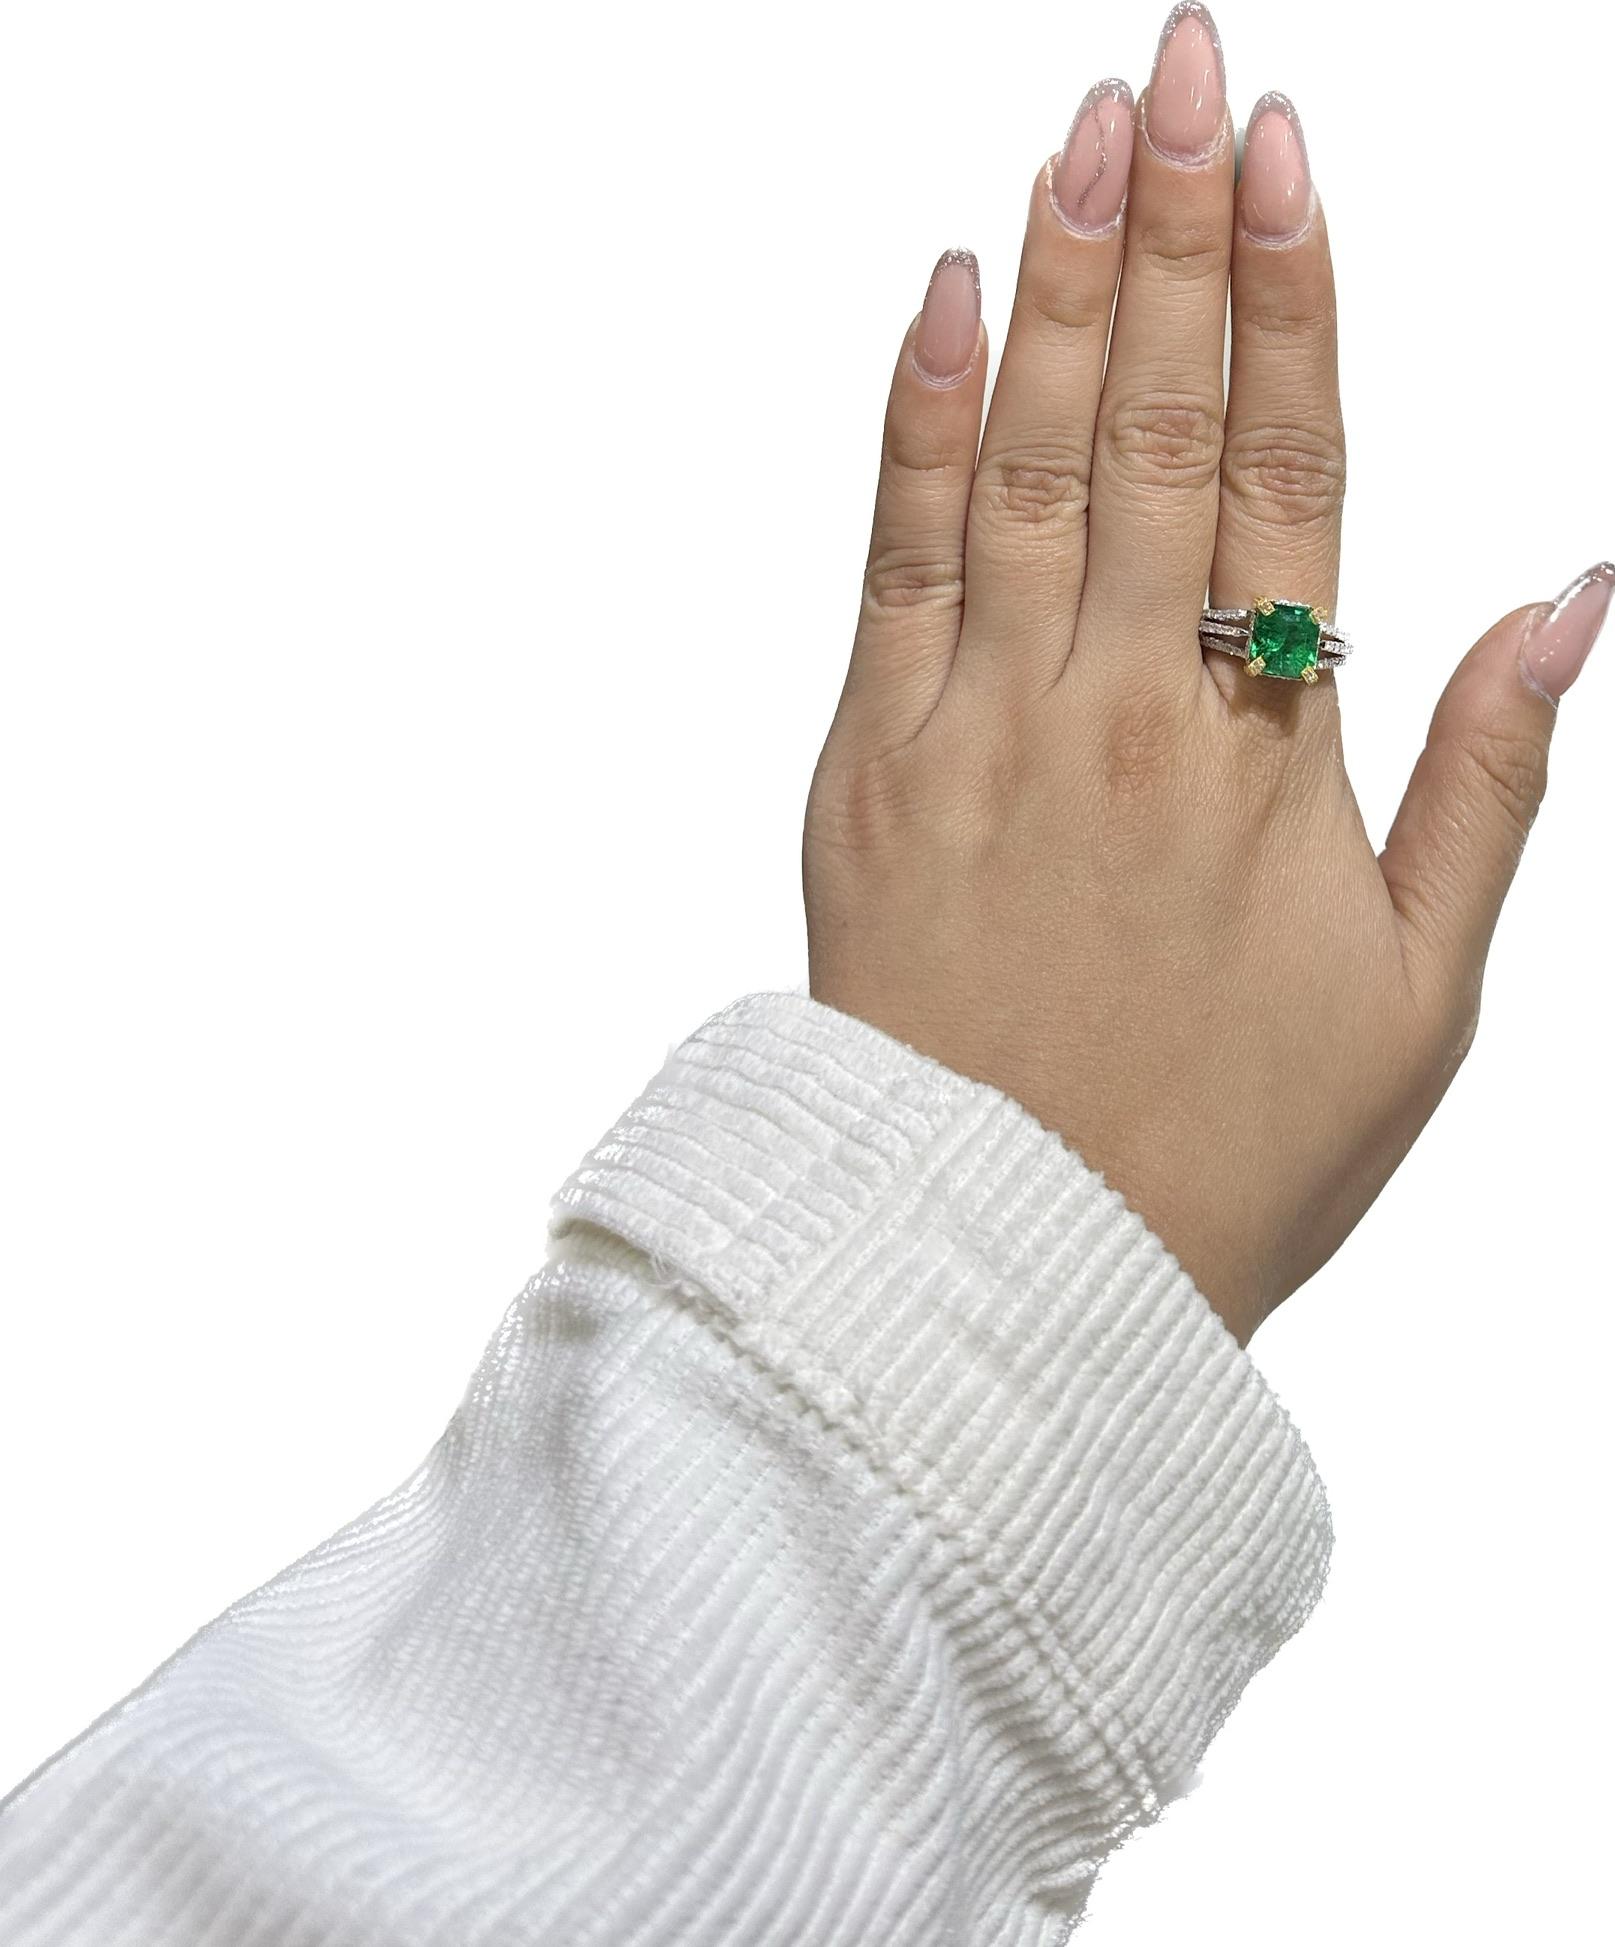 2.93 Carat Emerald Cut Colombian Emerald & 0.52Ct Diamond Ring 18K White/Y Gold For Sale 11